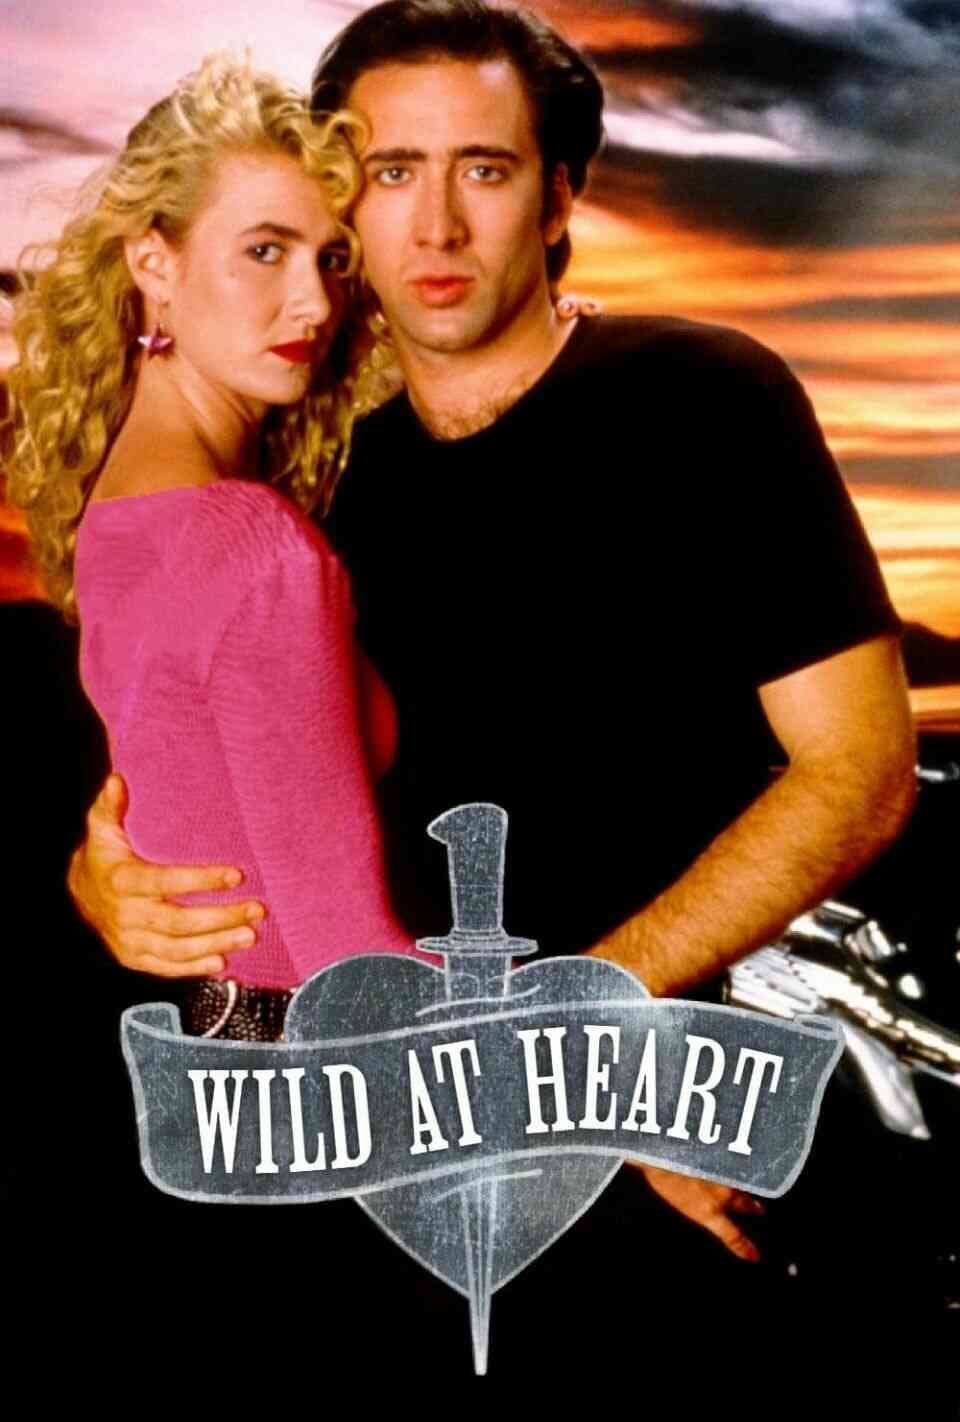 Read Wild at Heart screenplay (poster)